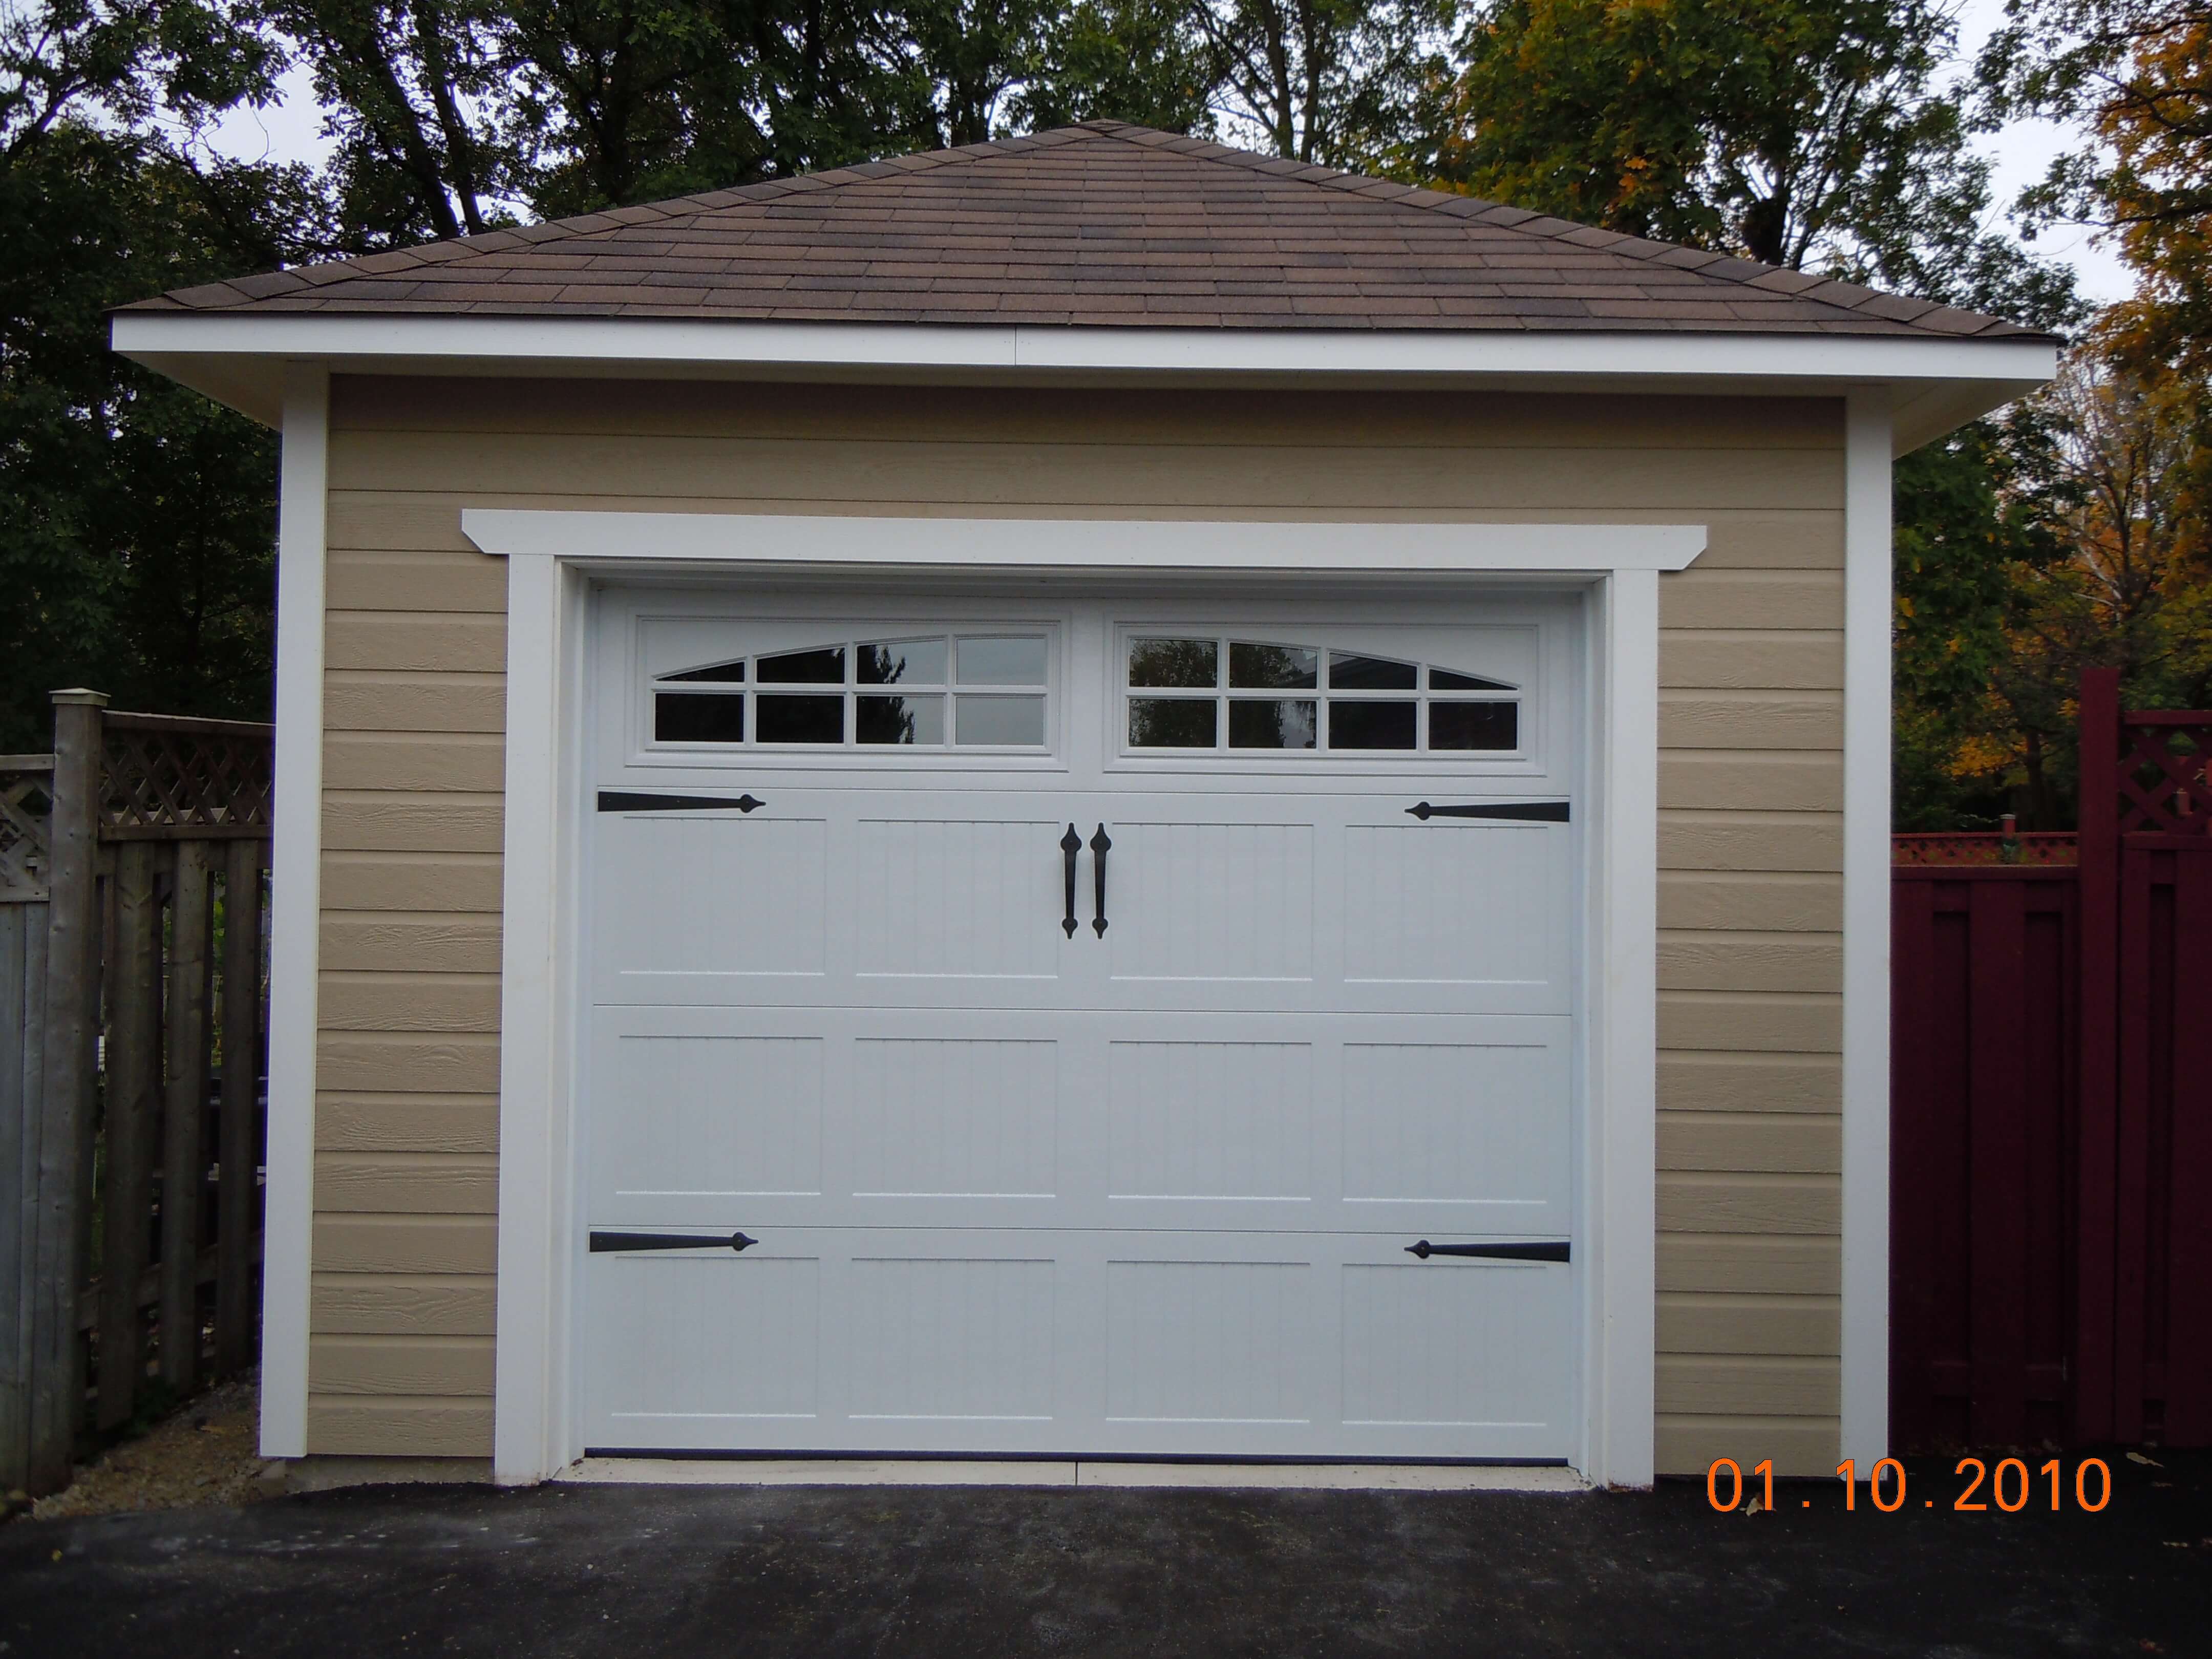 Archer garage 12 x 20 with Large Single Hung Window in Toronto Ontario. ID number 210027-1  